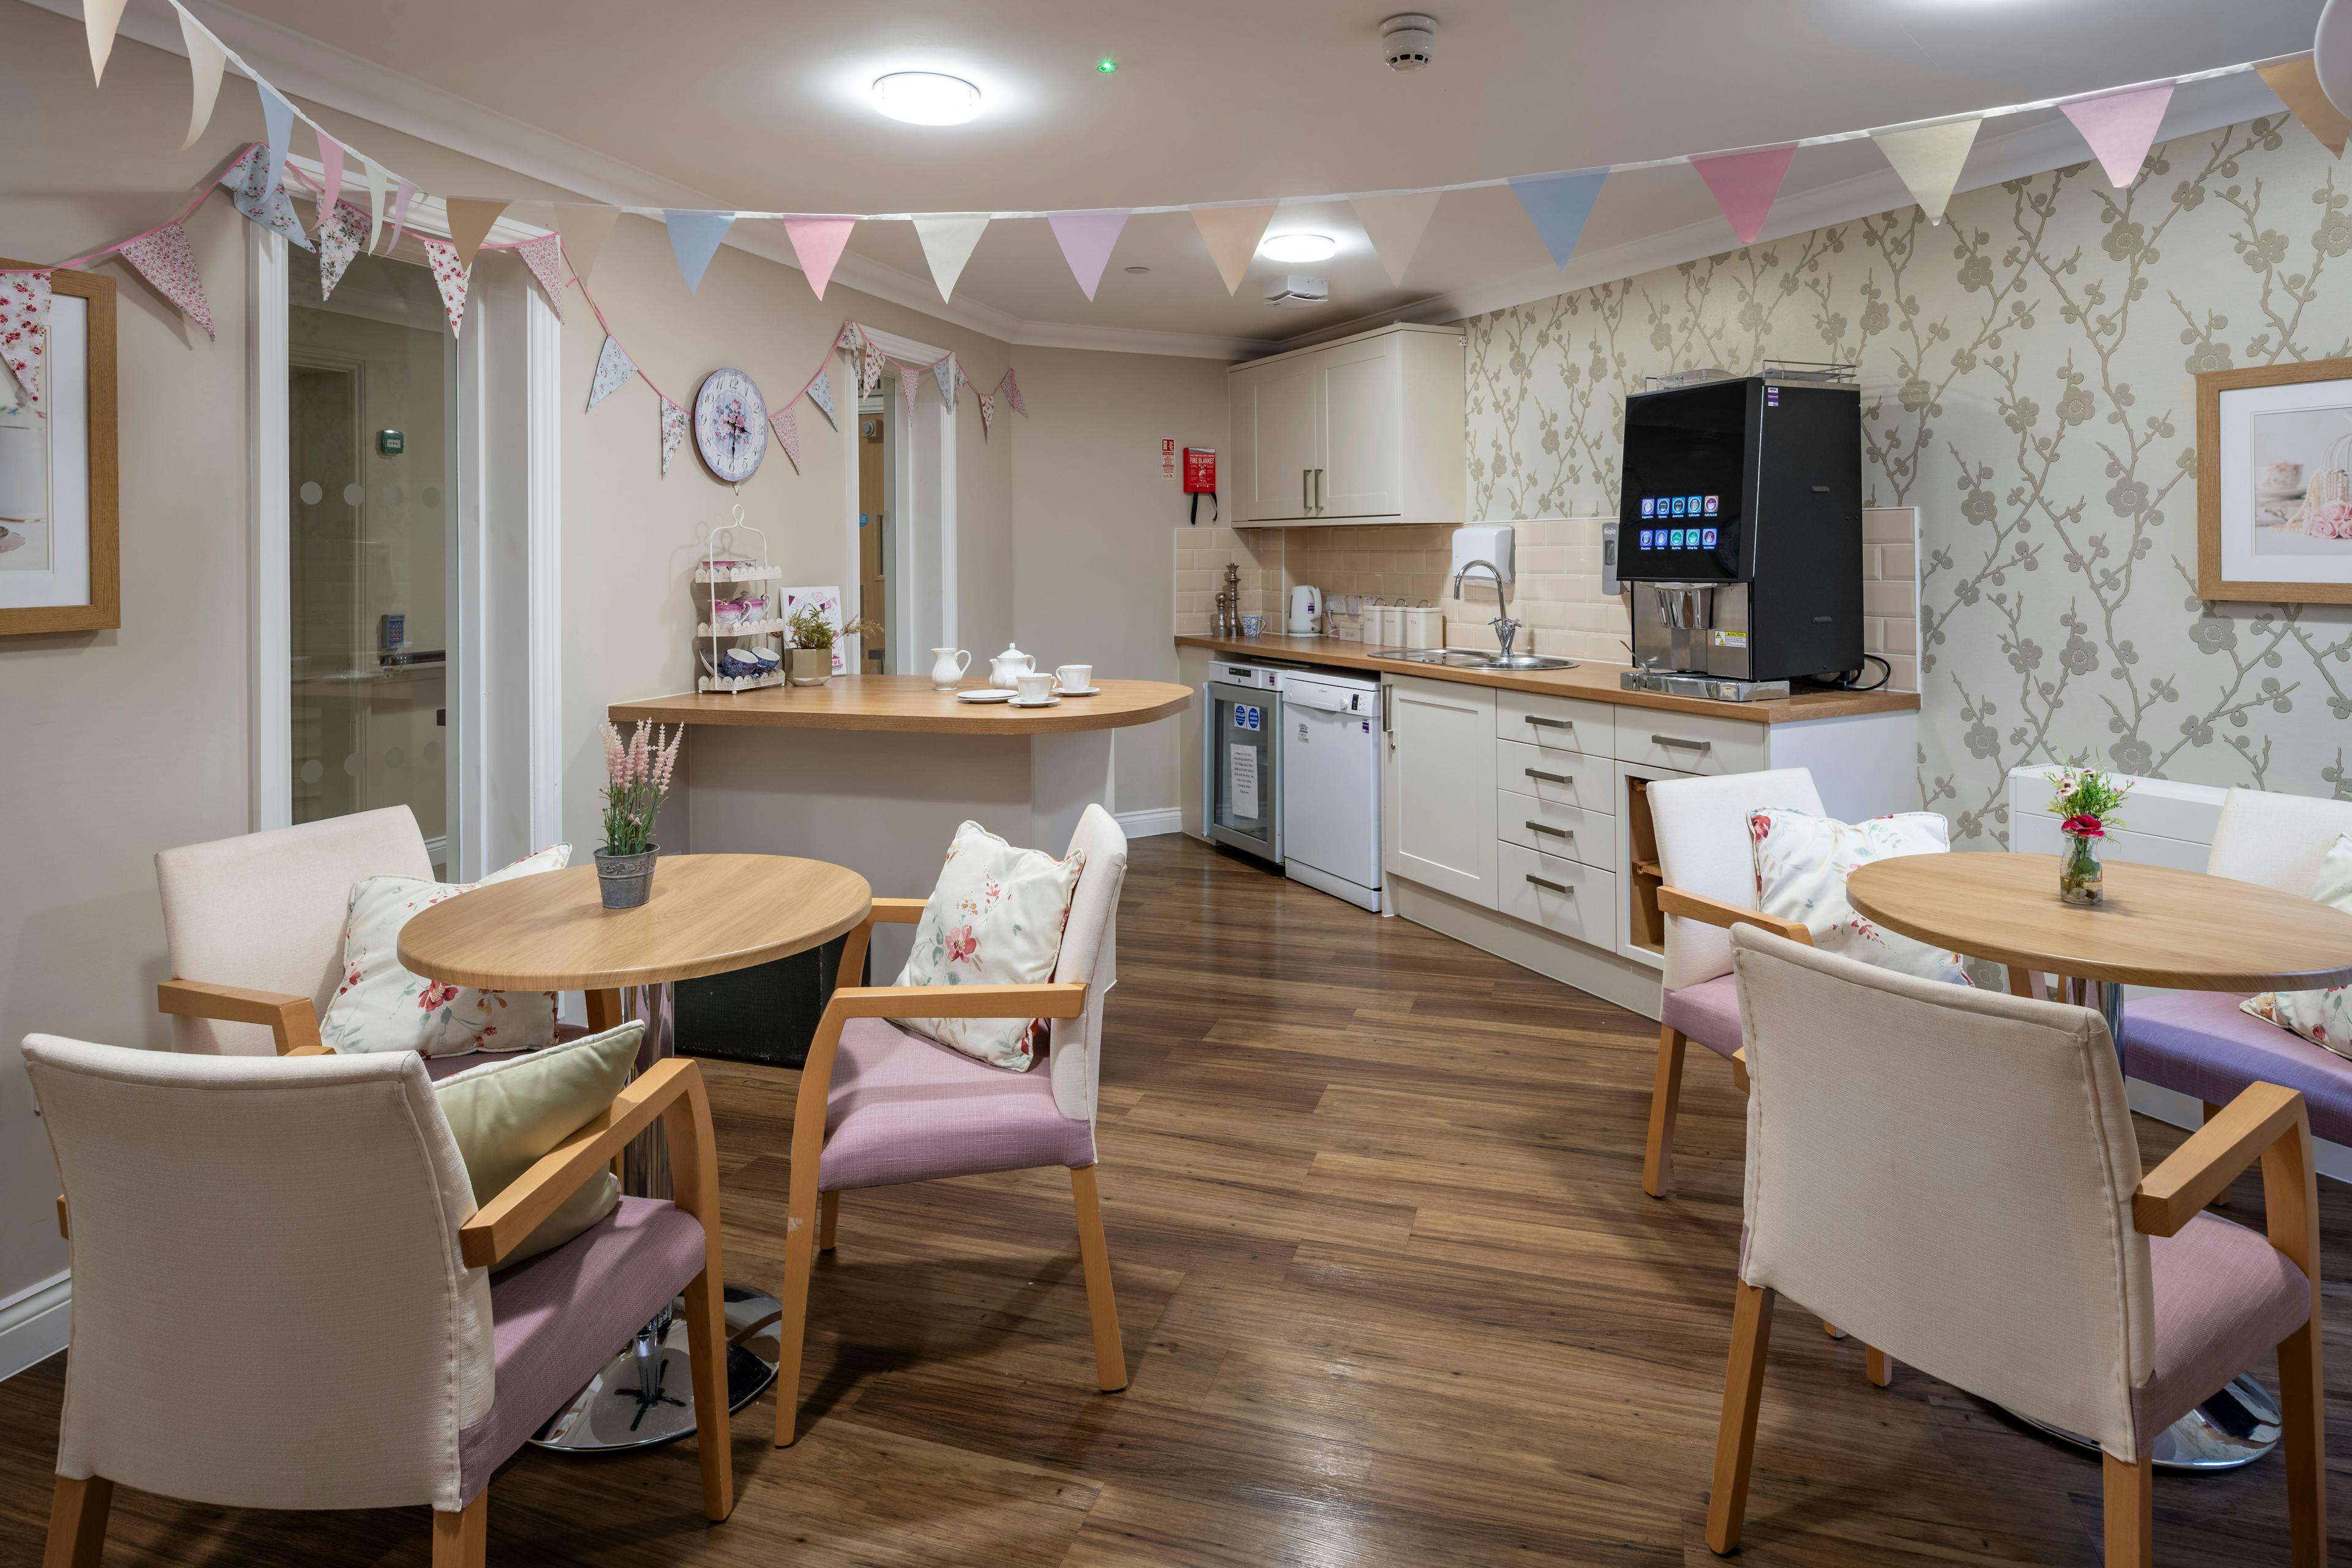 cafe area at The Lakes Care Home in Cirencester, Cotsworld